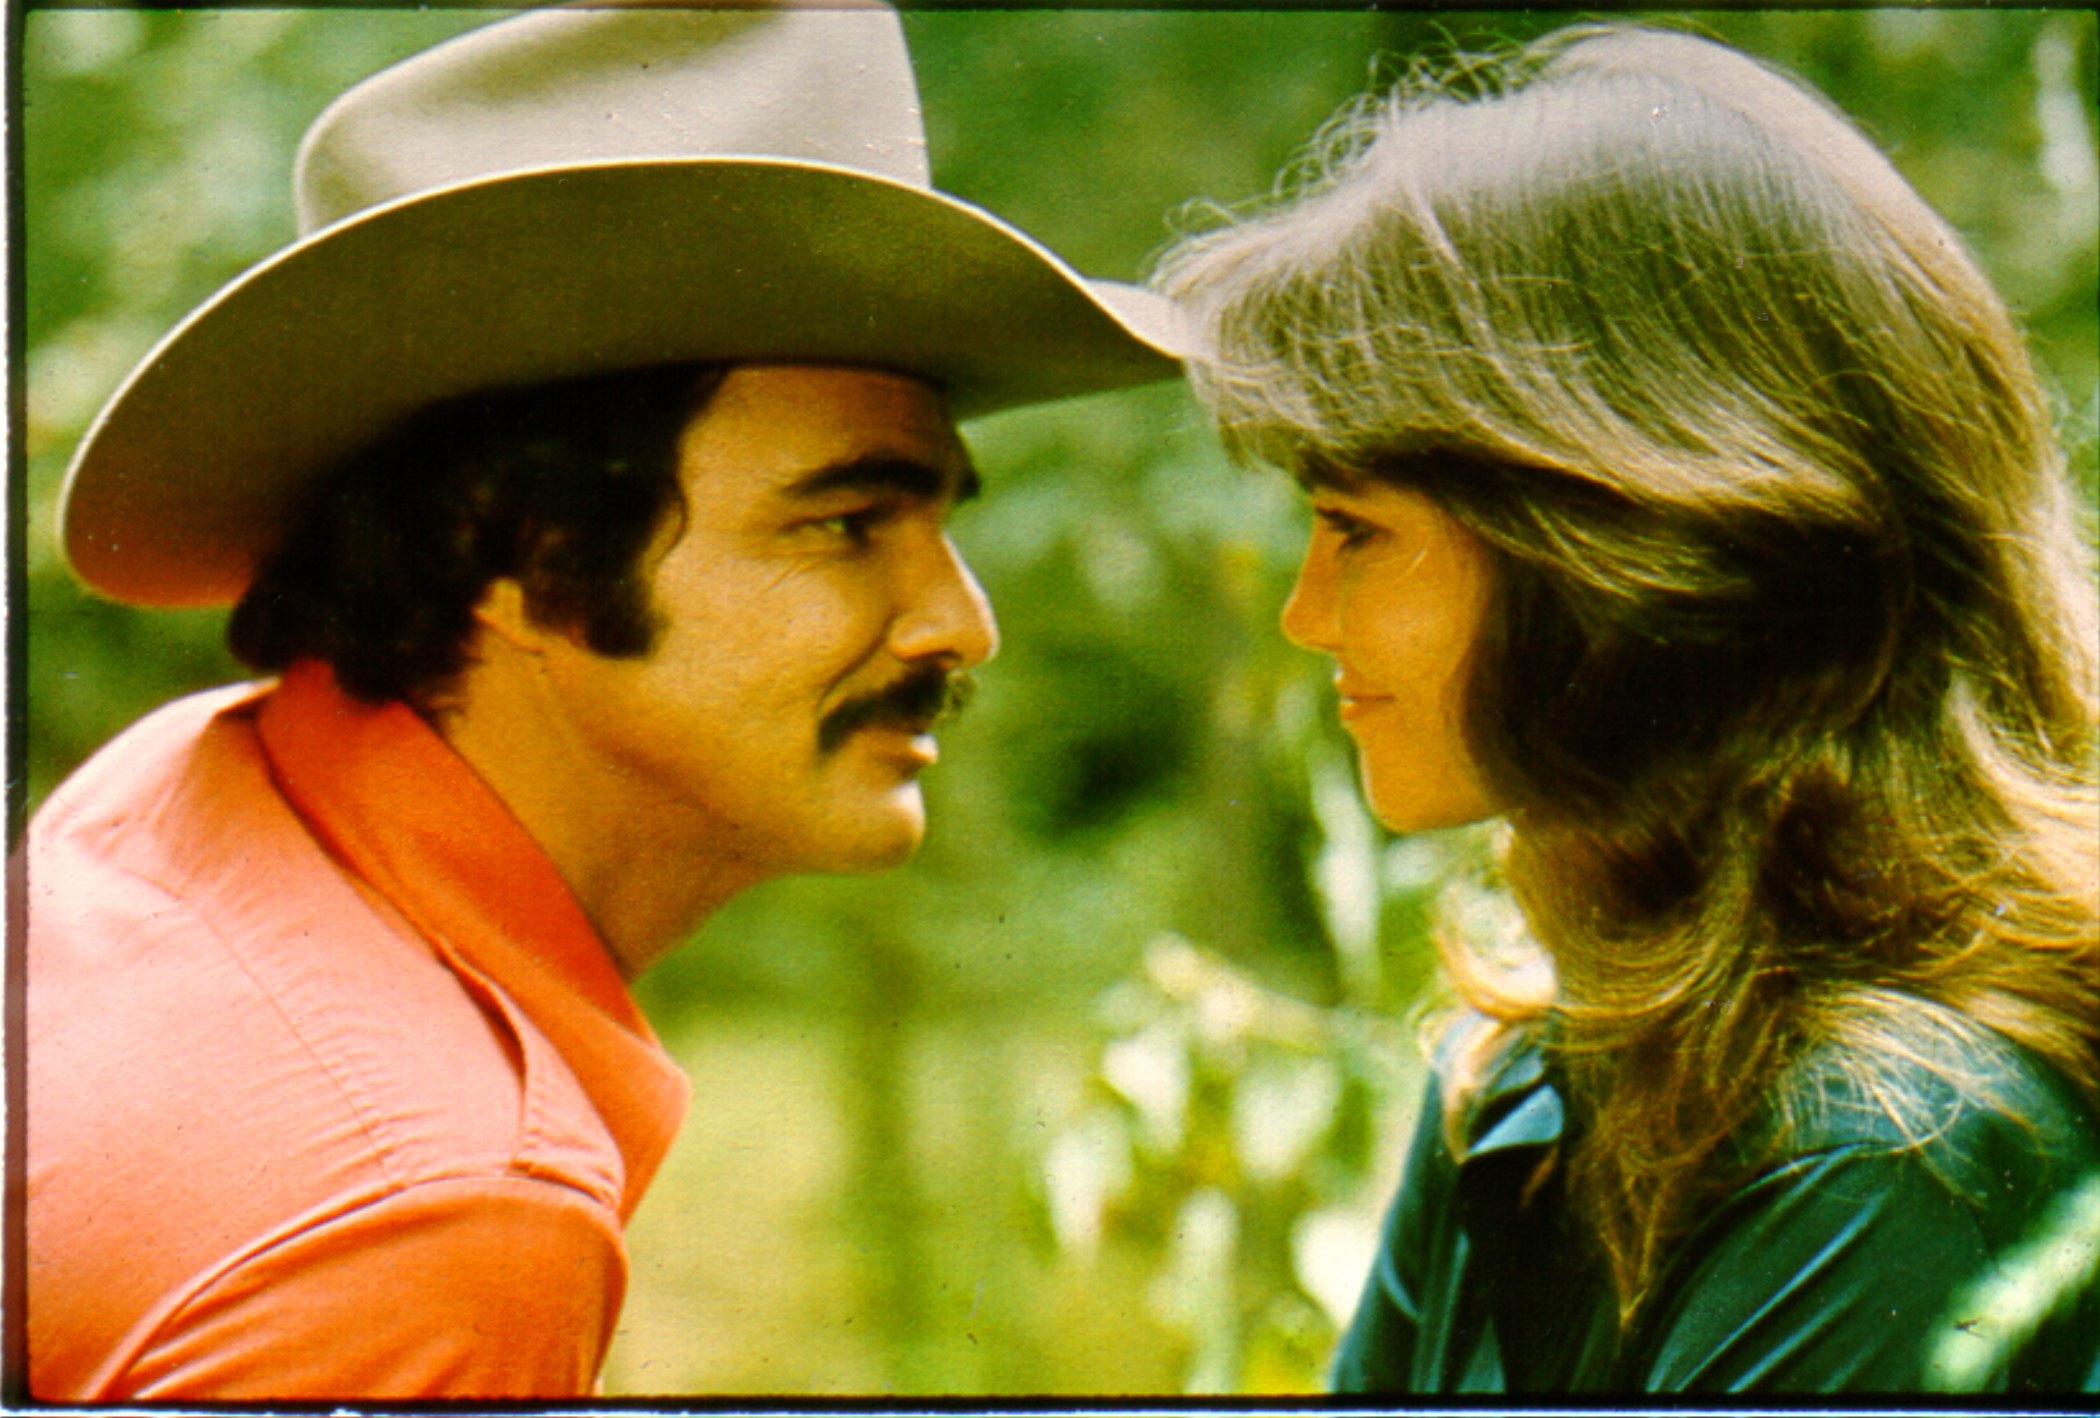 Actor Burt Reynolds as Bandit and Sally Field as Carrie in the comedy film "Smokey and the Bandit" on January 1, 1977 | Source: Getty Images